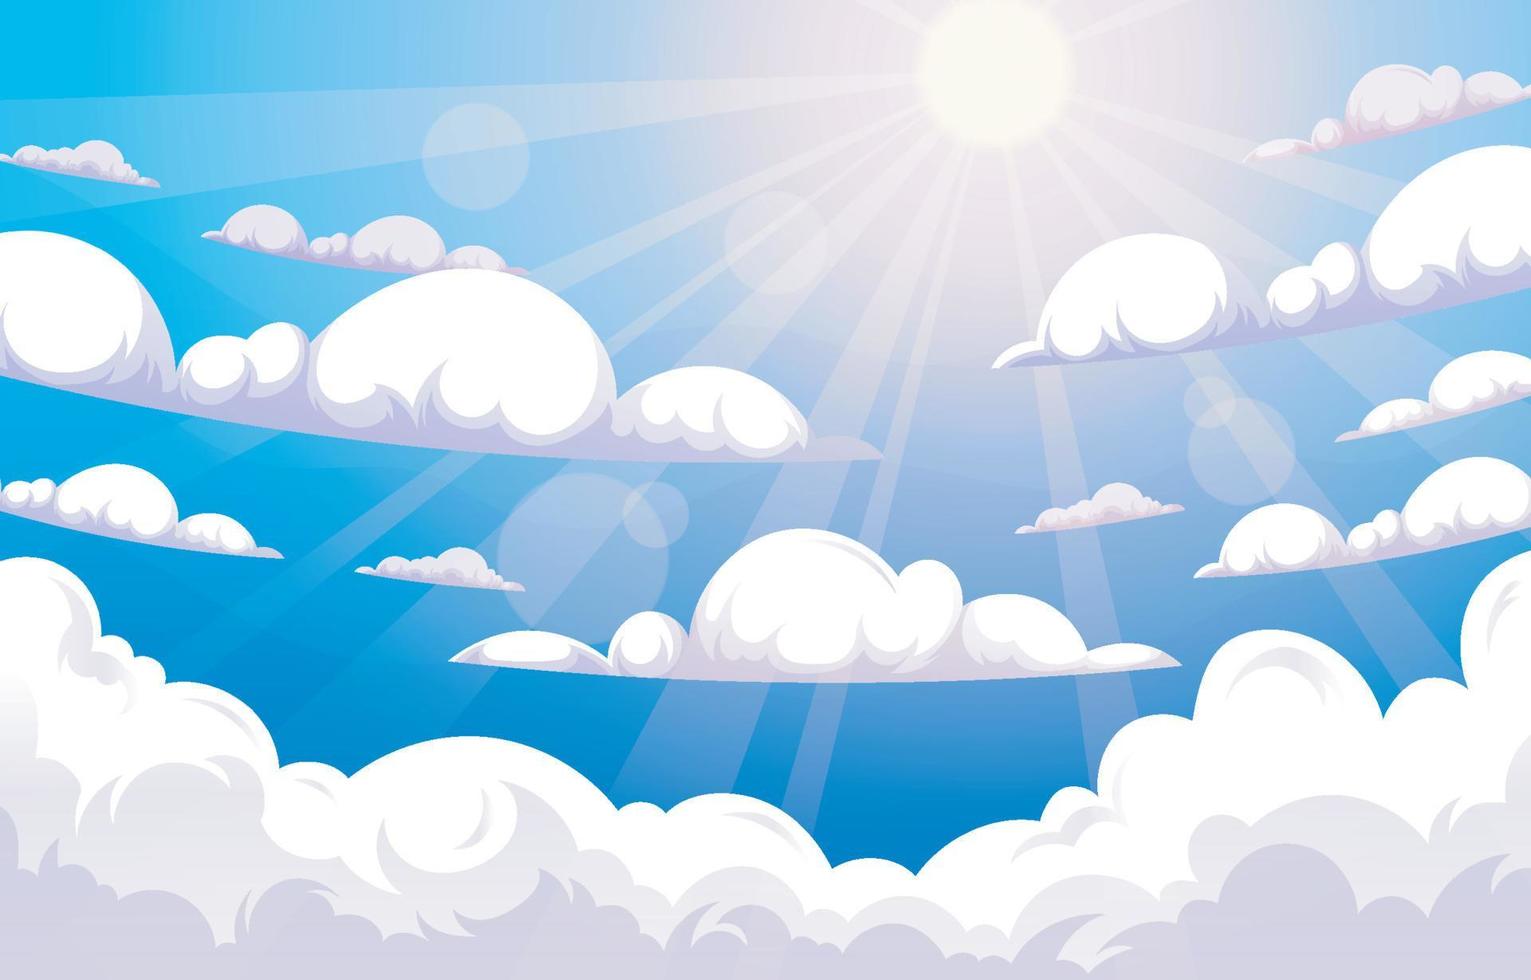 Sun Light and Blue Sky with Clouds vector